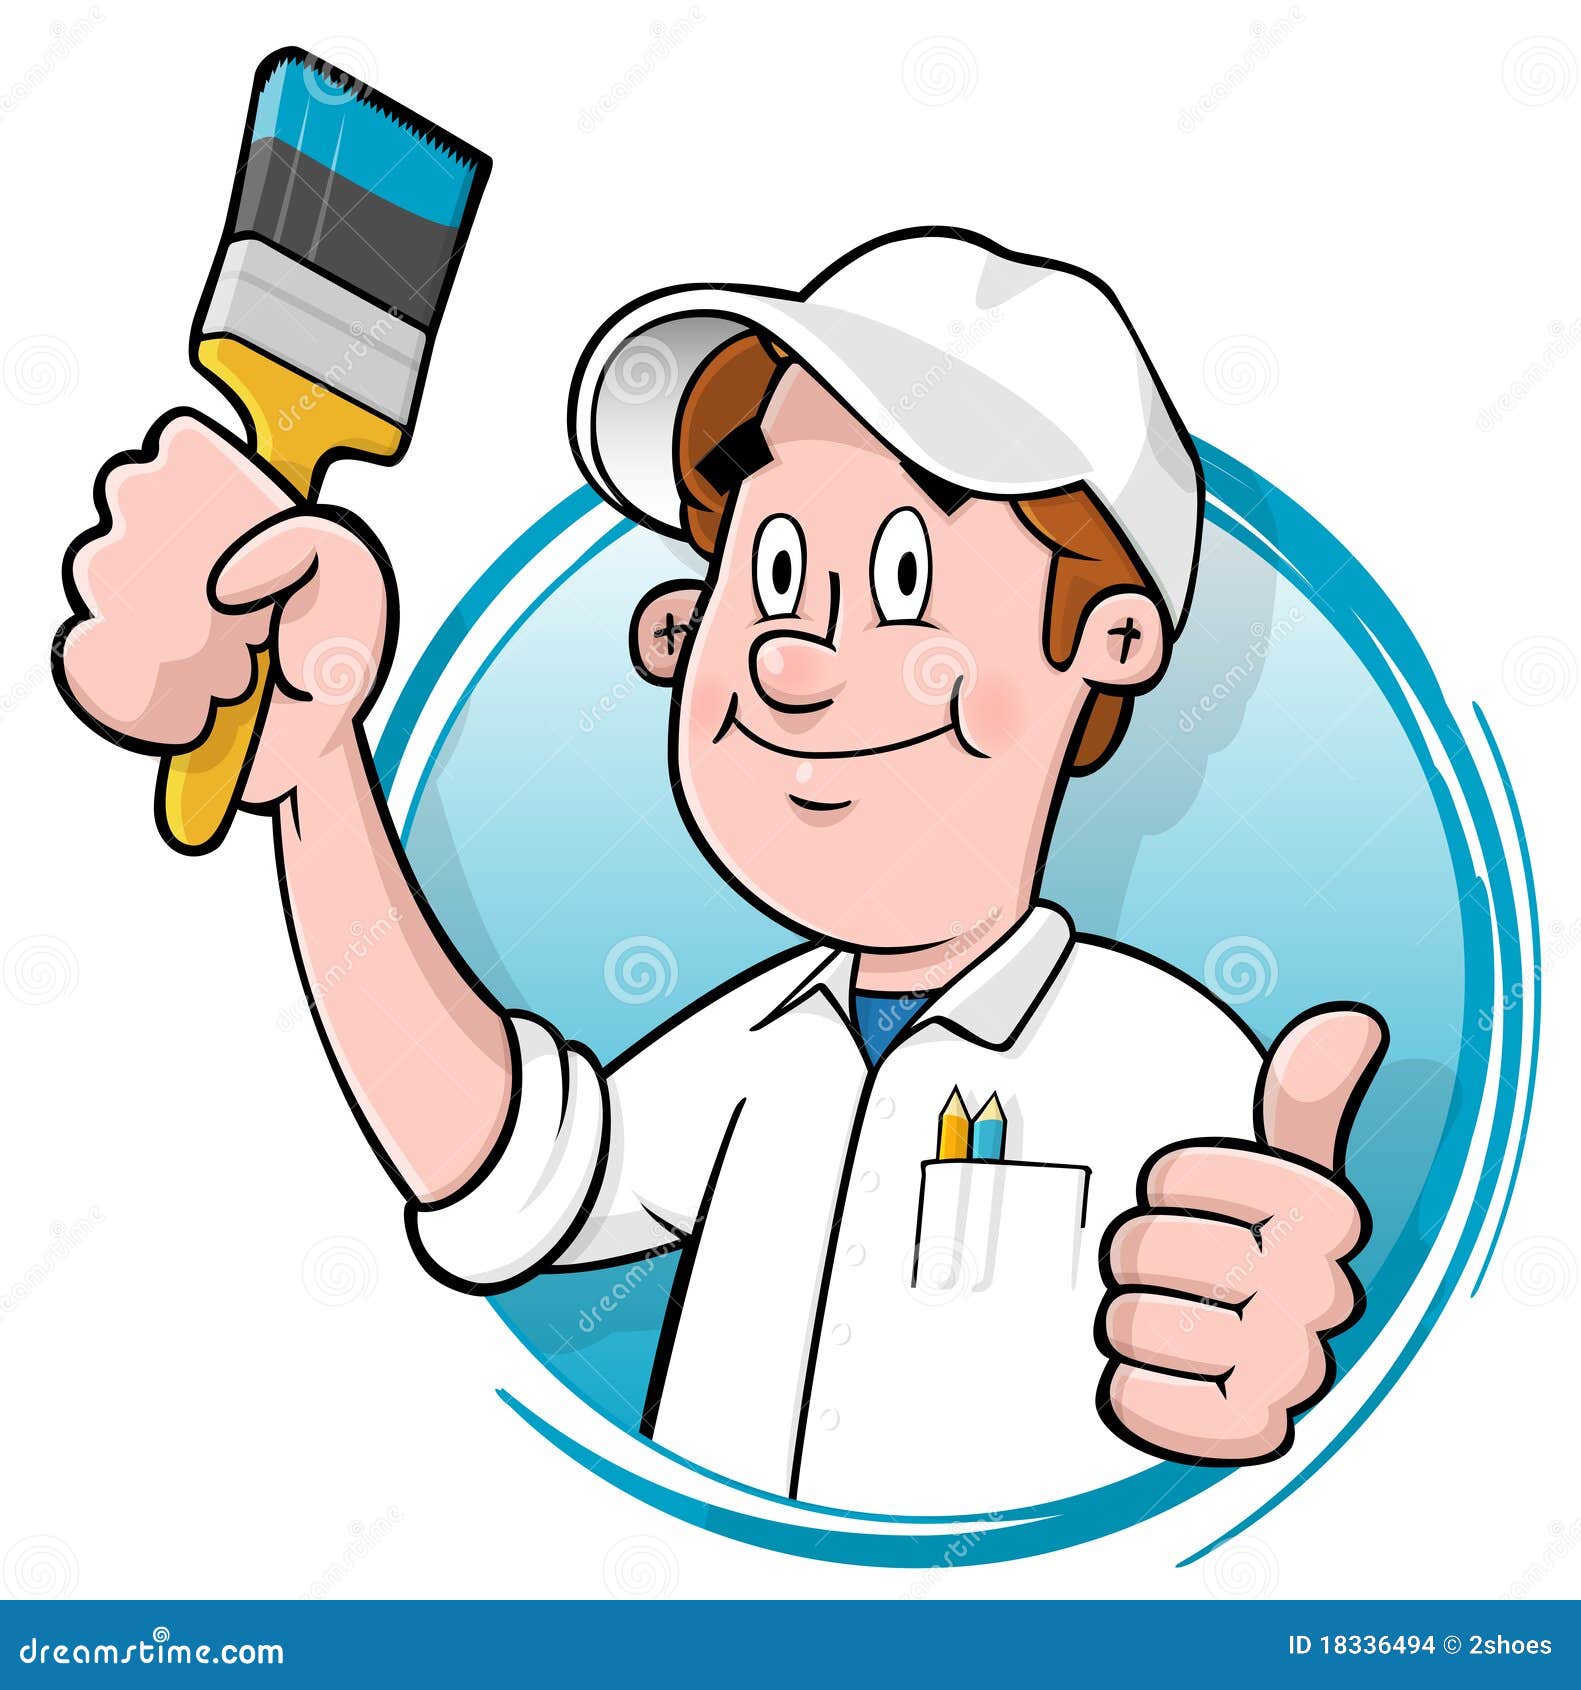 free clipart of house painters - photo #49